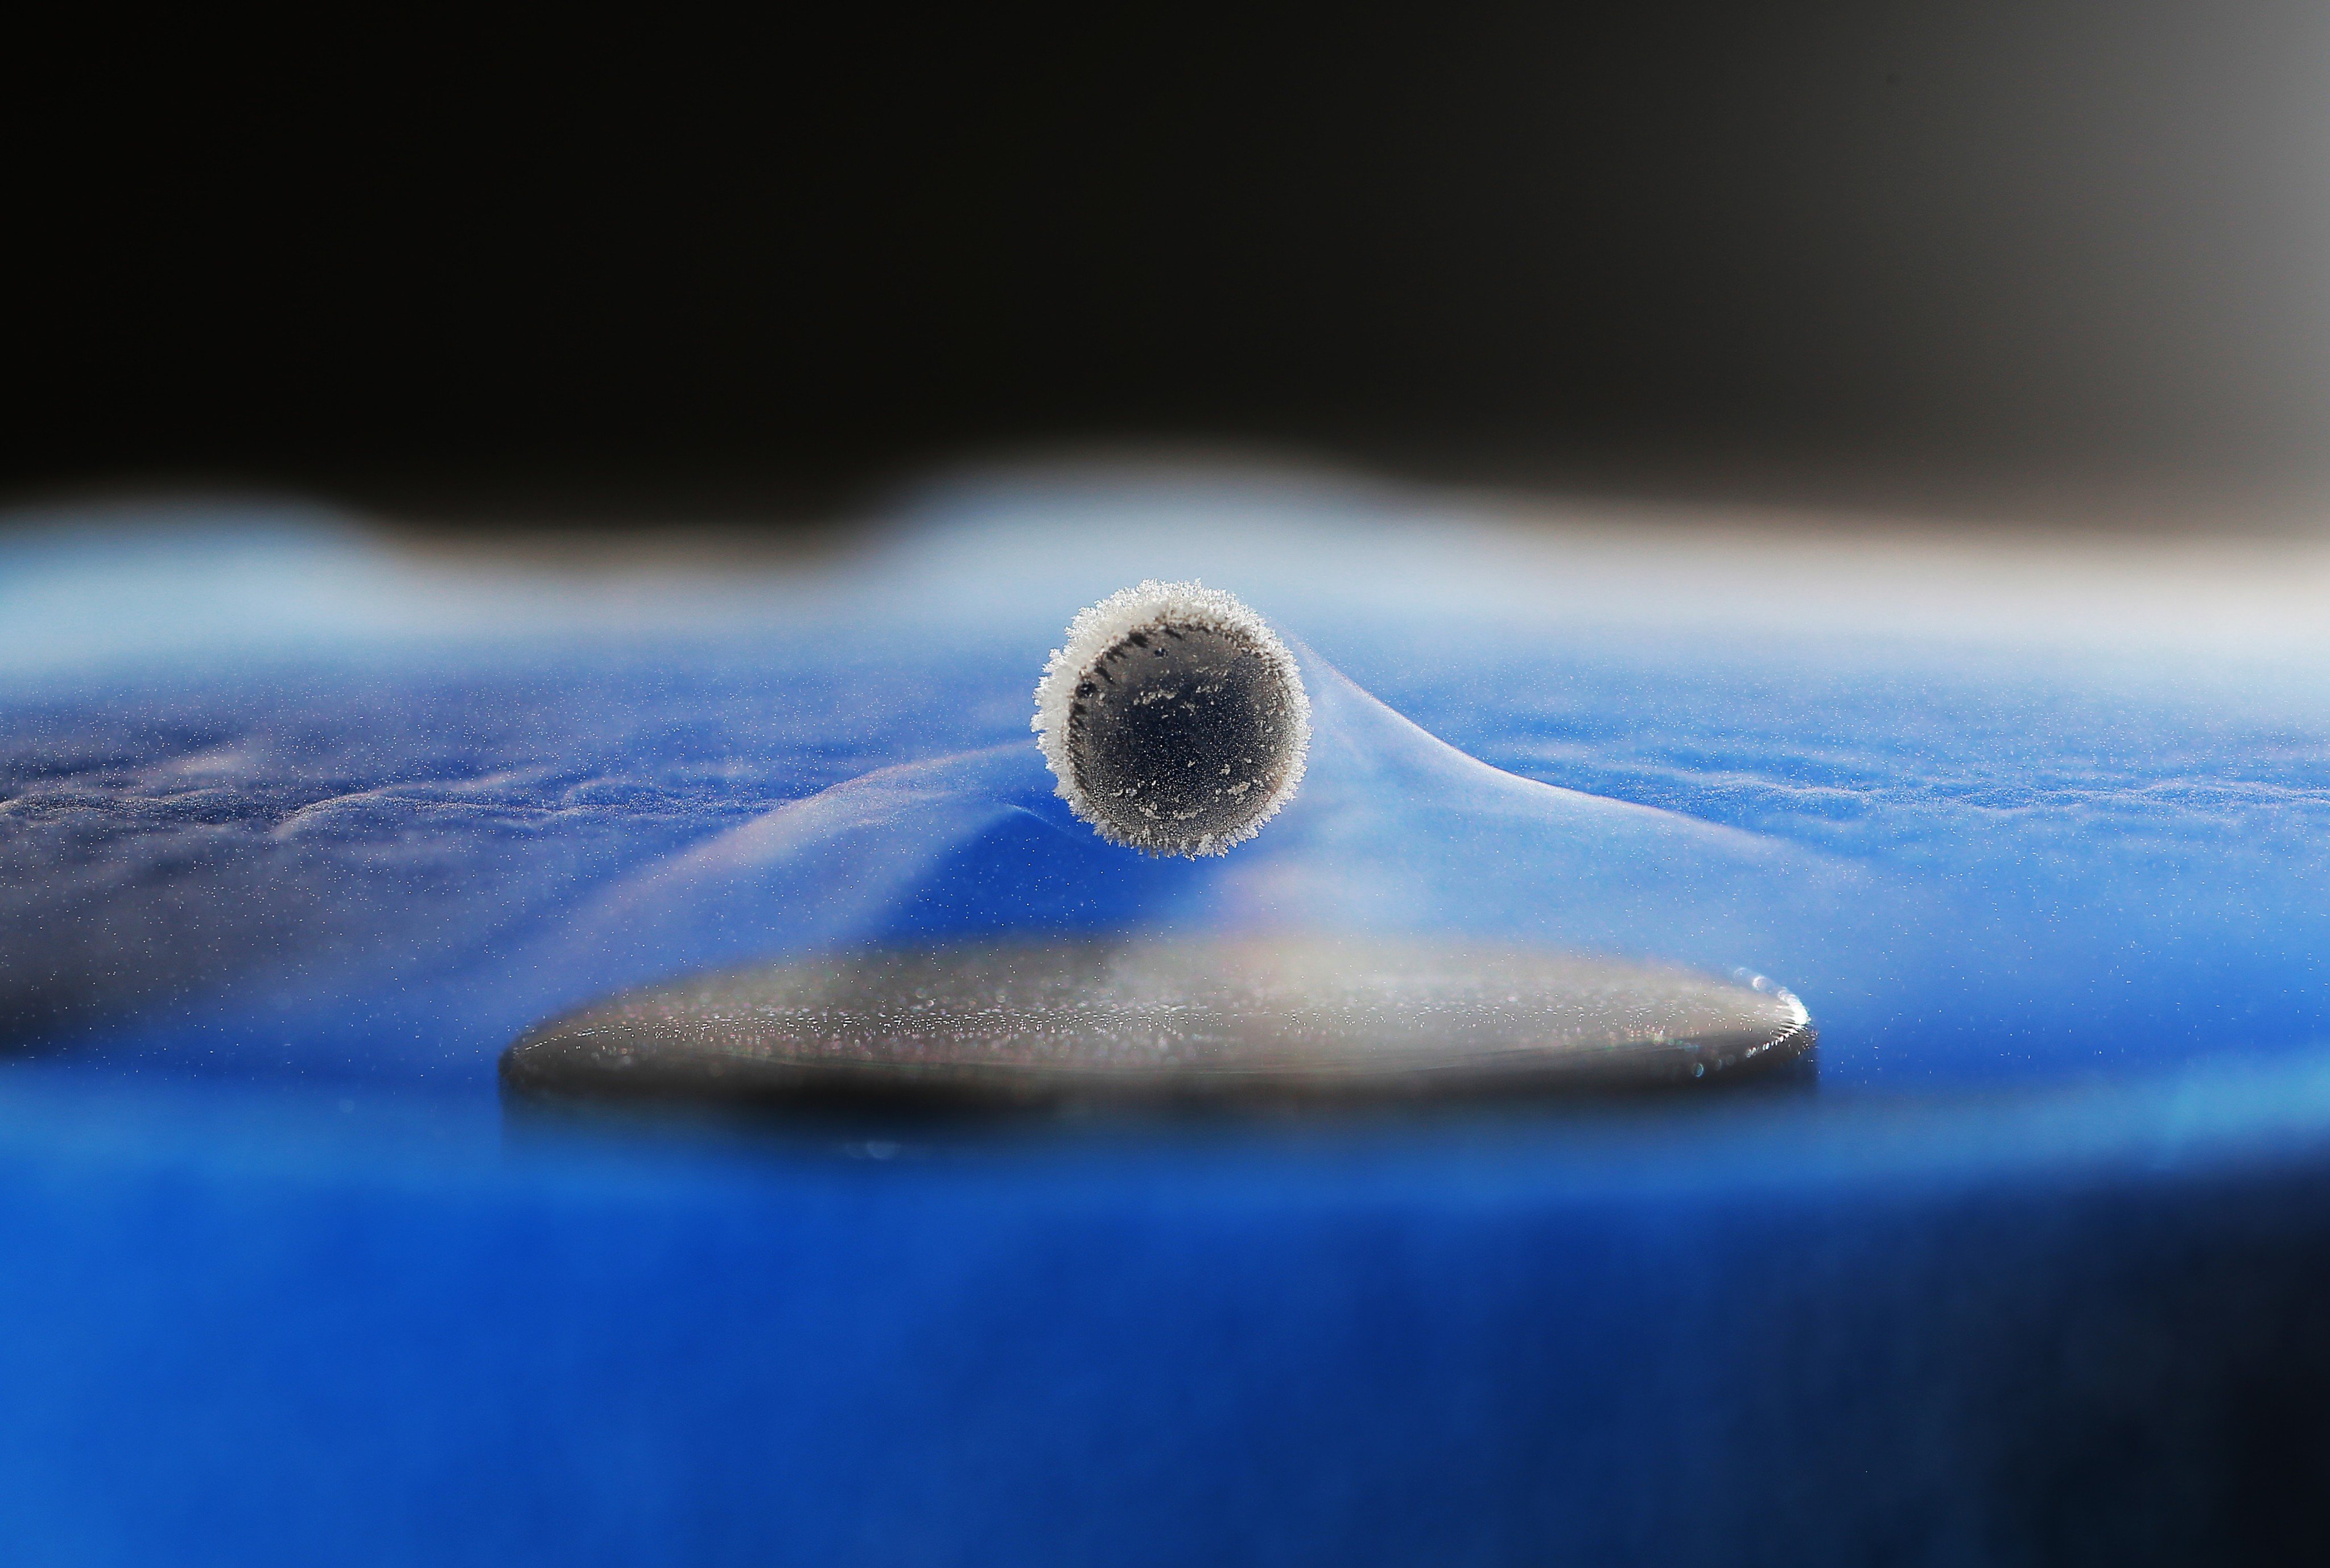 Superconductors are materials that do not have electrical resistance and expel magnetic fields. Photo: Shutterstock